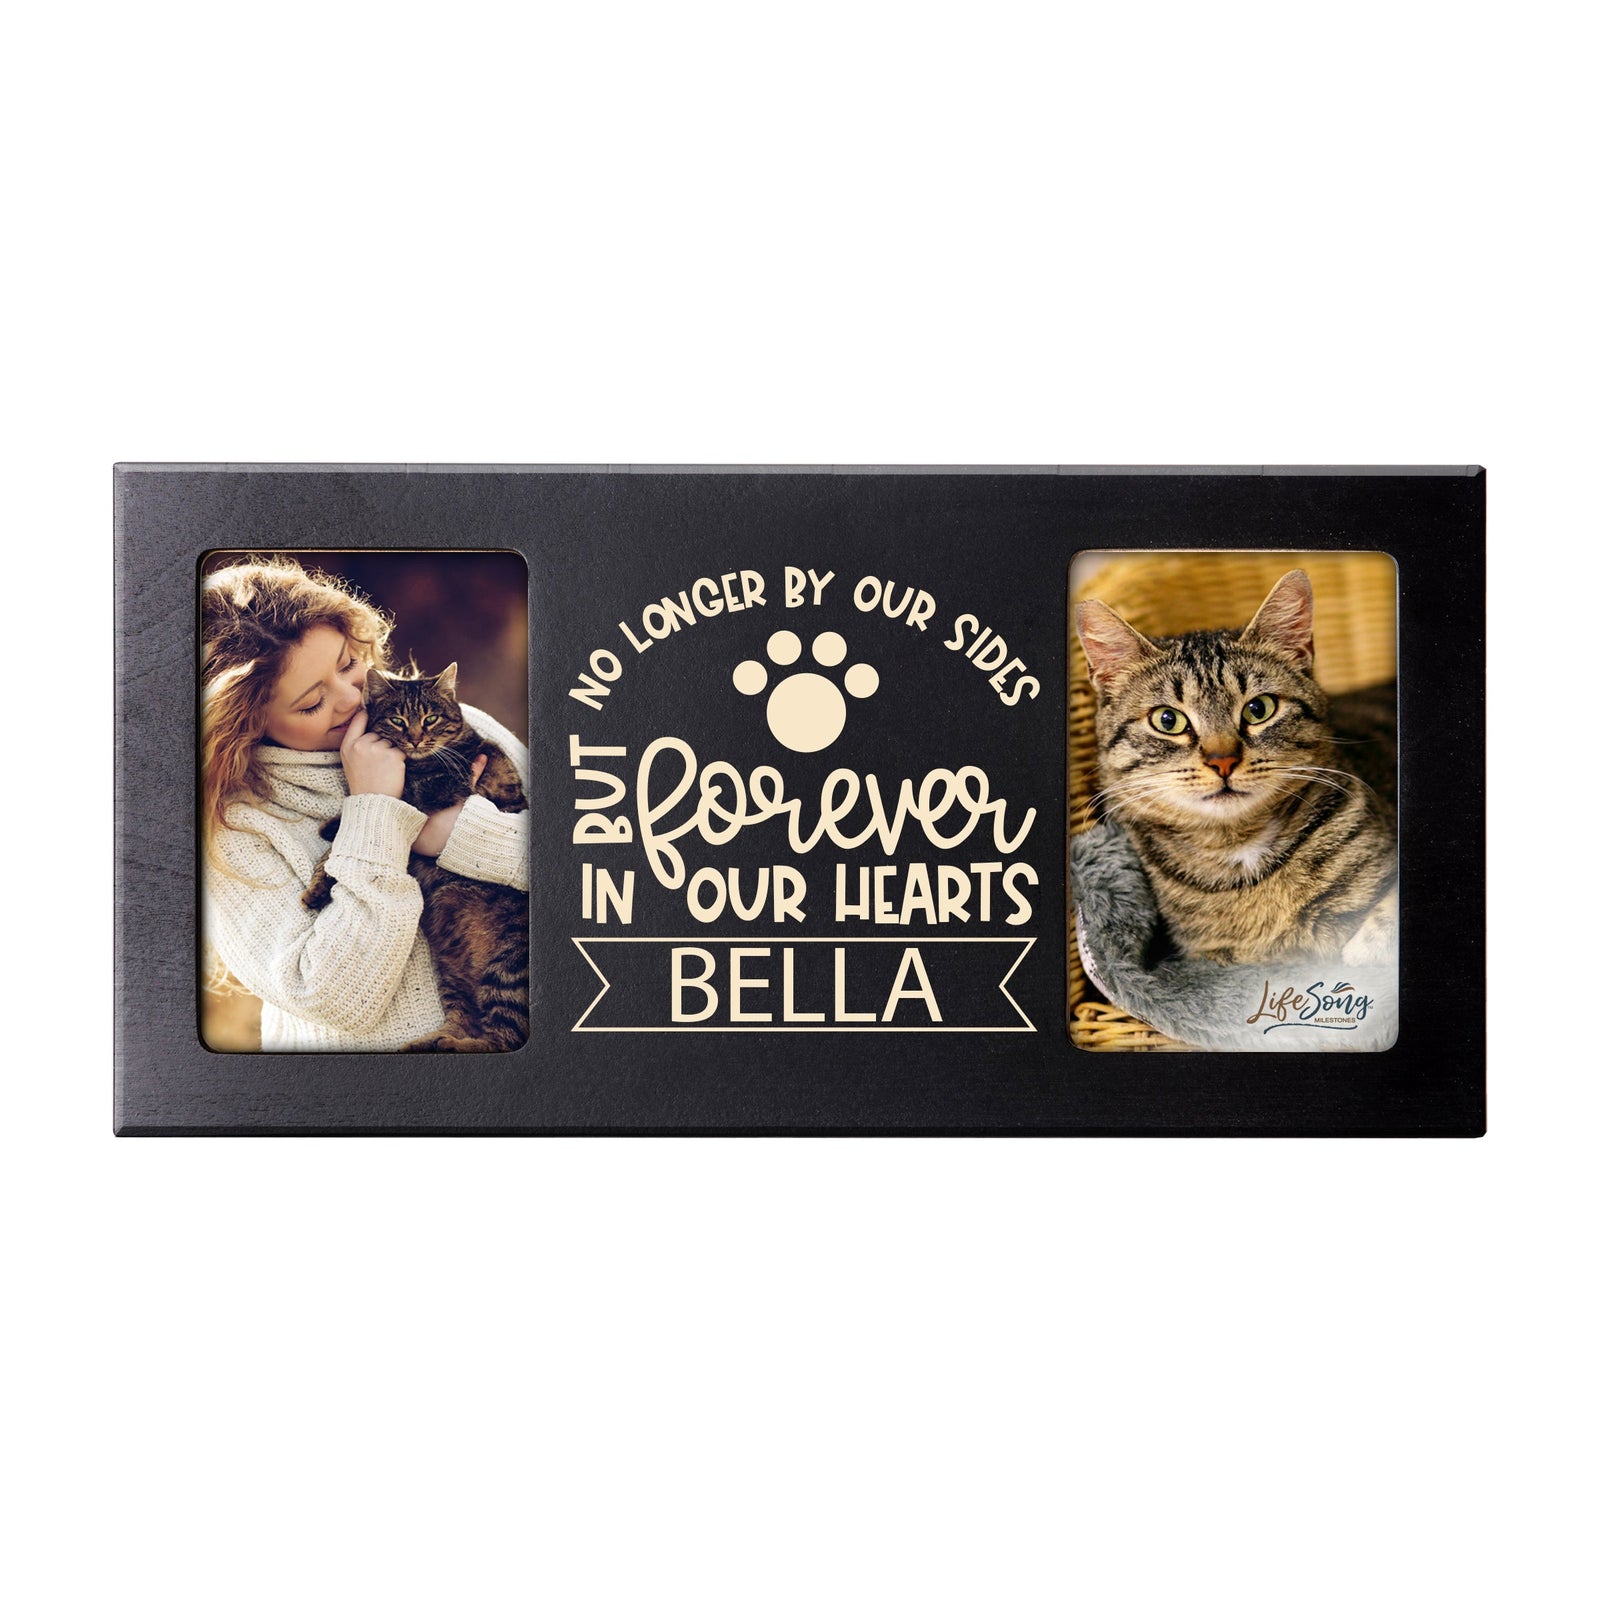 Black Pet Memorial Double 4x6 Picture Frame with phrase "No Longer By Our Sides"